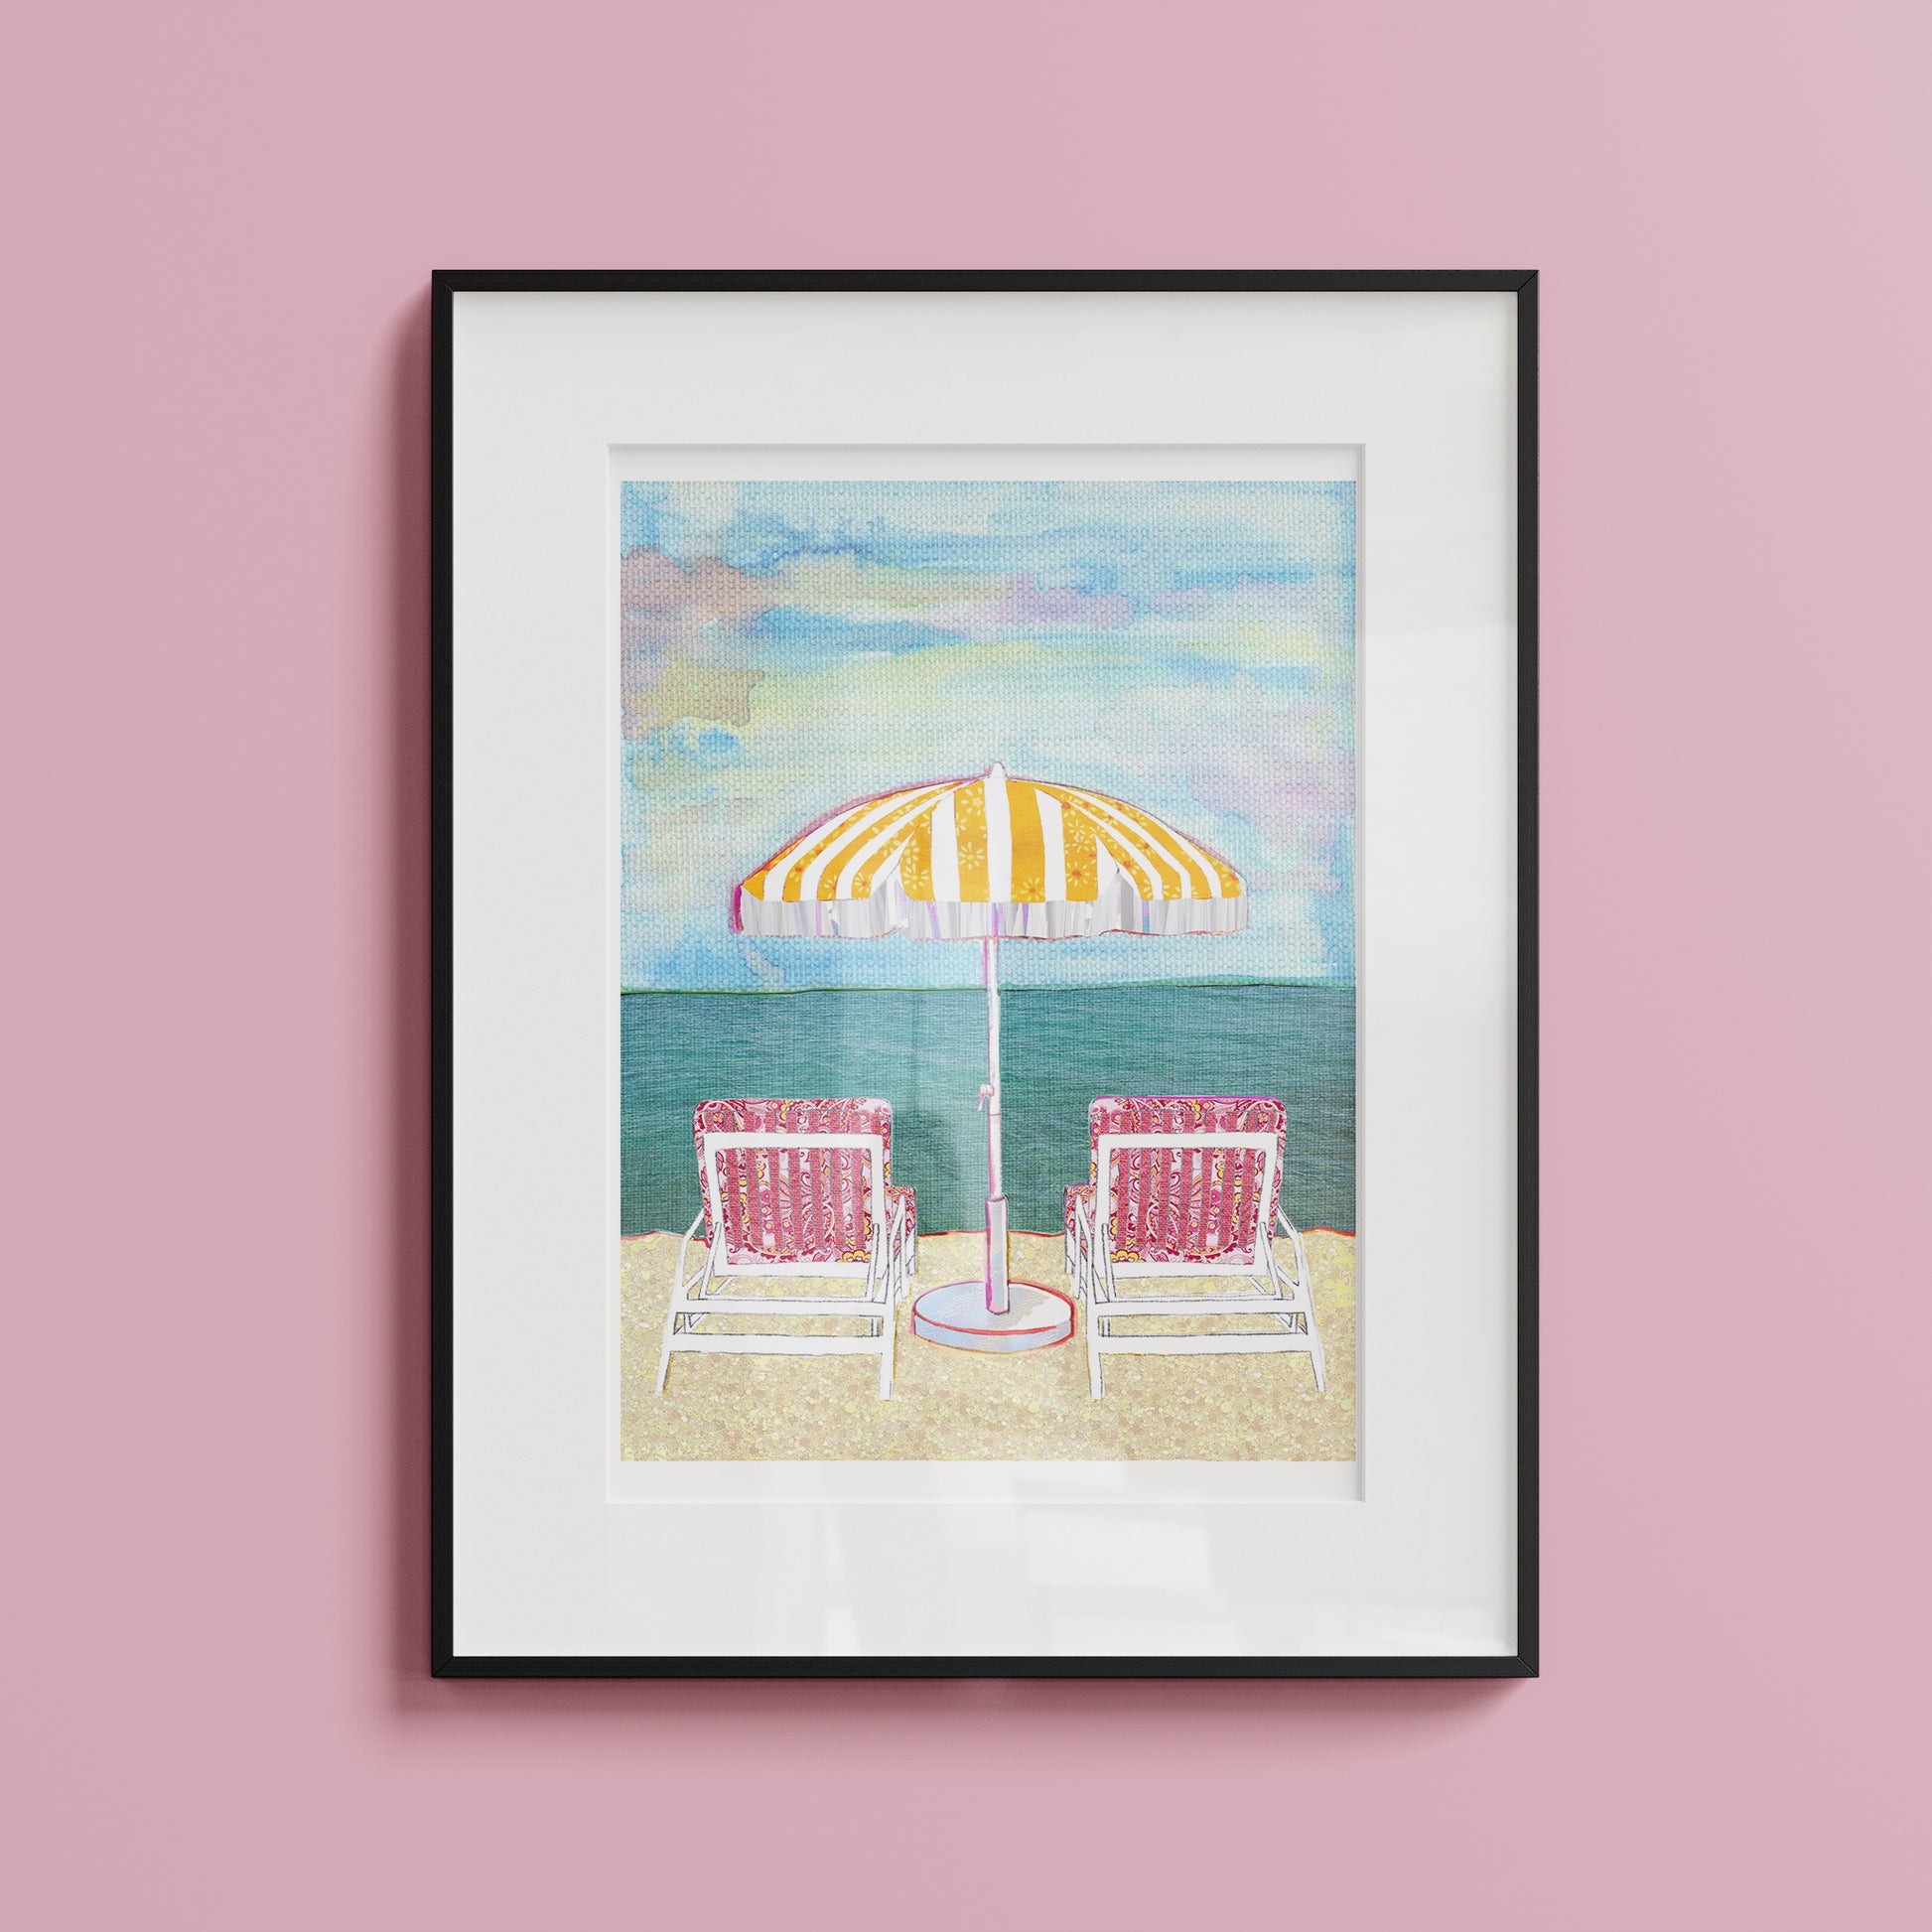 Image of a pretty pastel beach scene featuring 2 chairs and a parasol by the sea